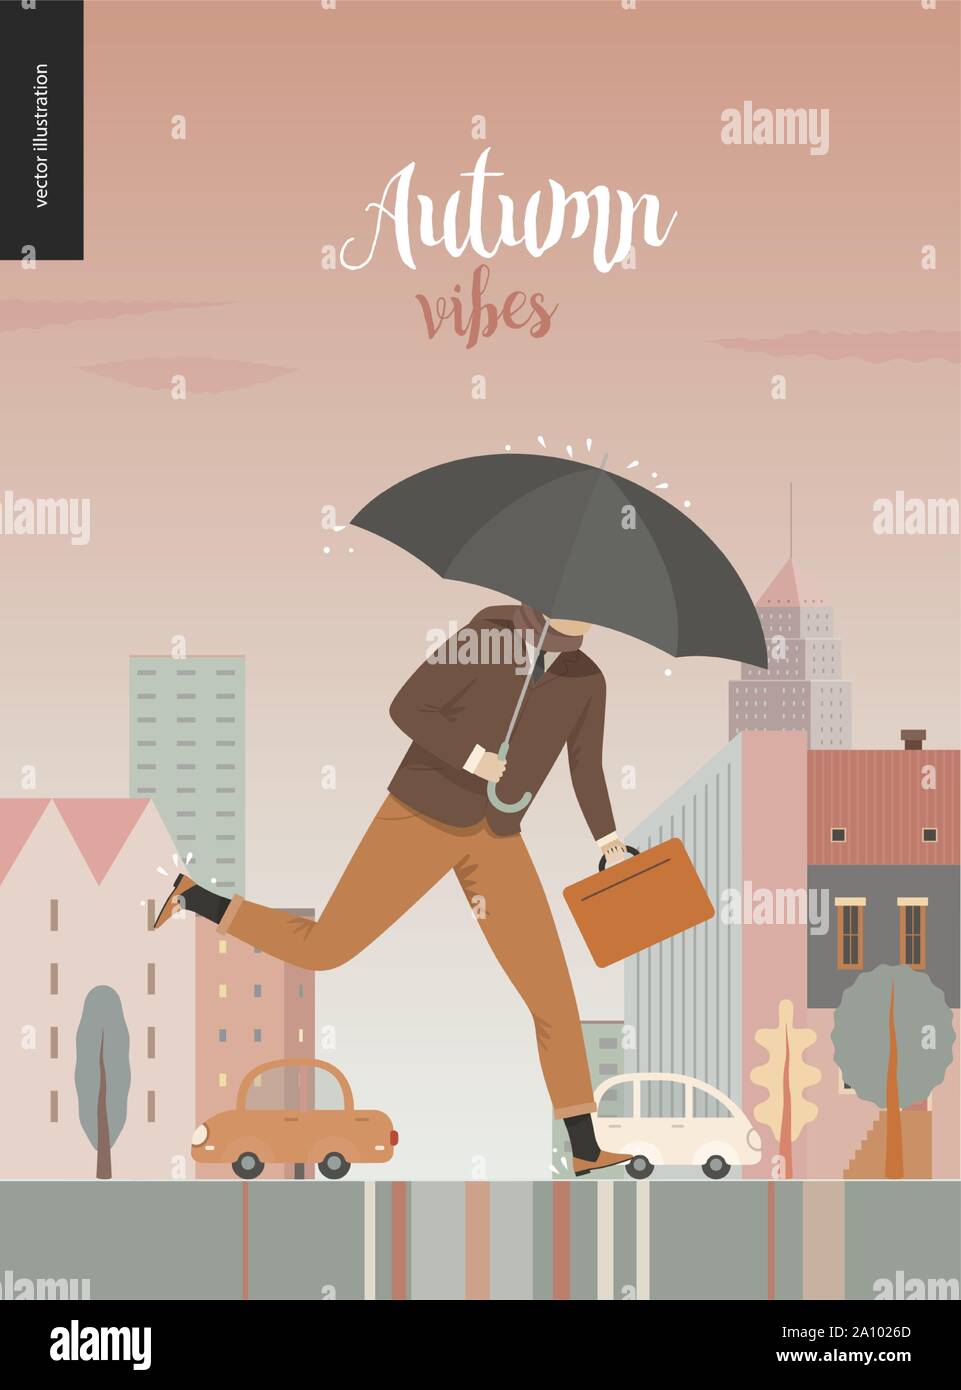 Rain - running businessman -modern flat vector concept illustration of an adult man wearing suit, with an umbrella and suitcase, running under the rai Stock Vector